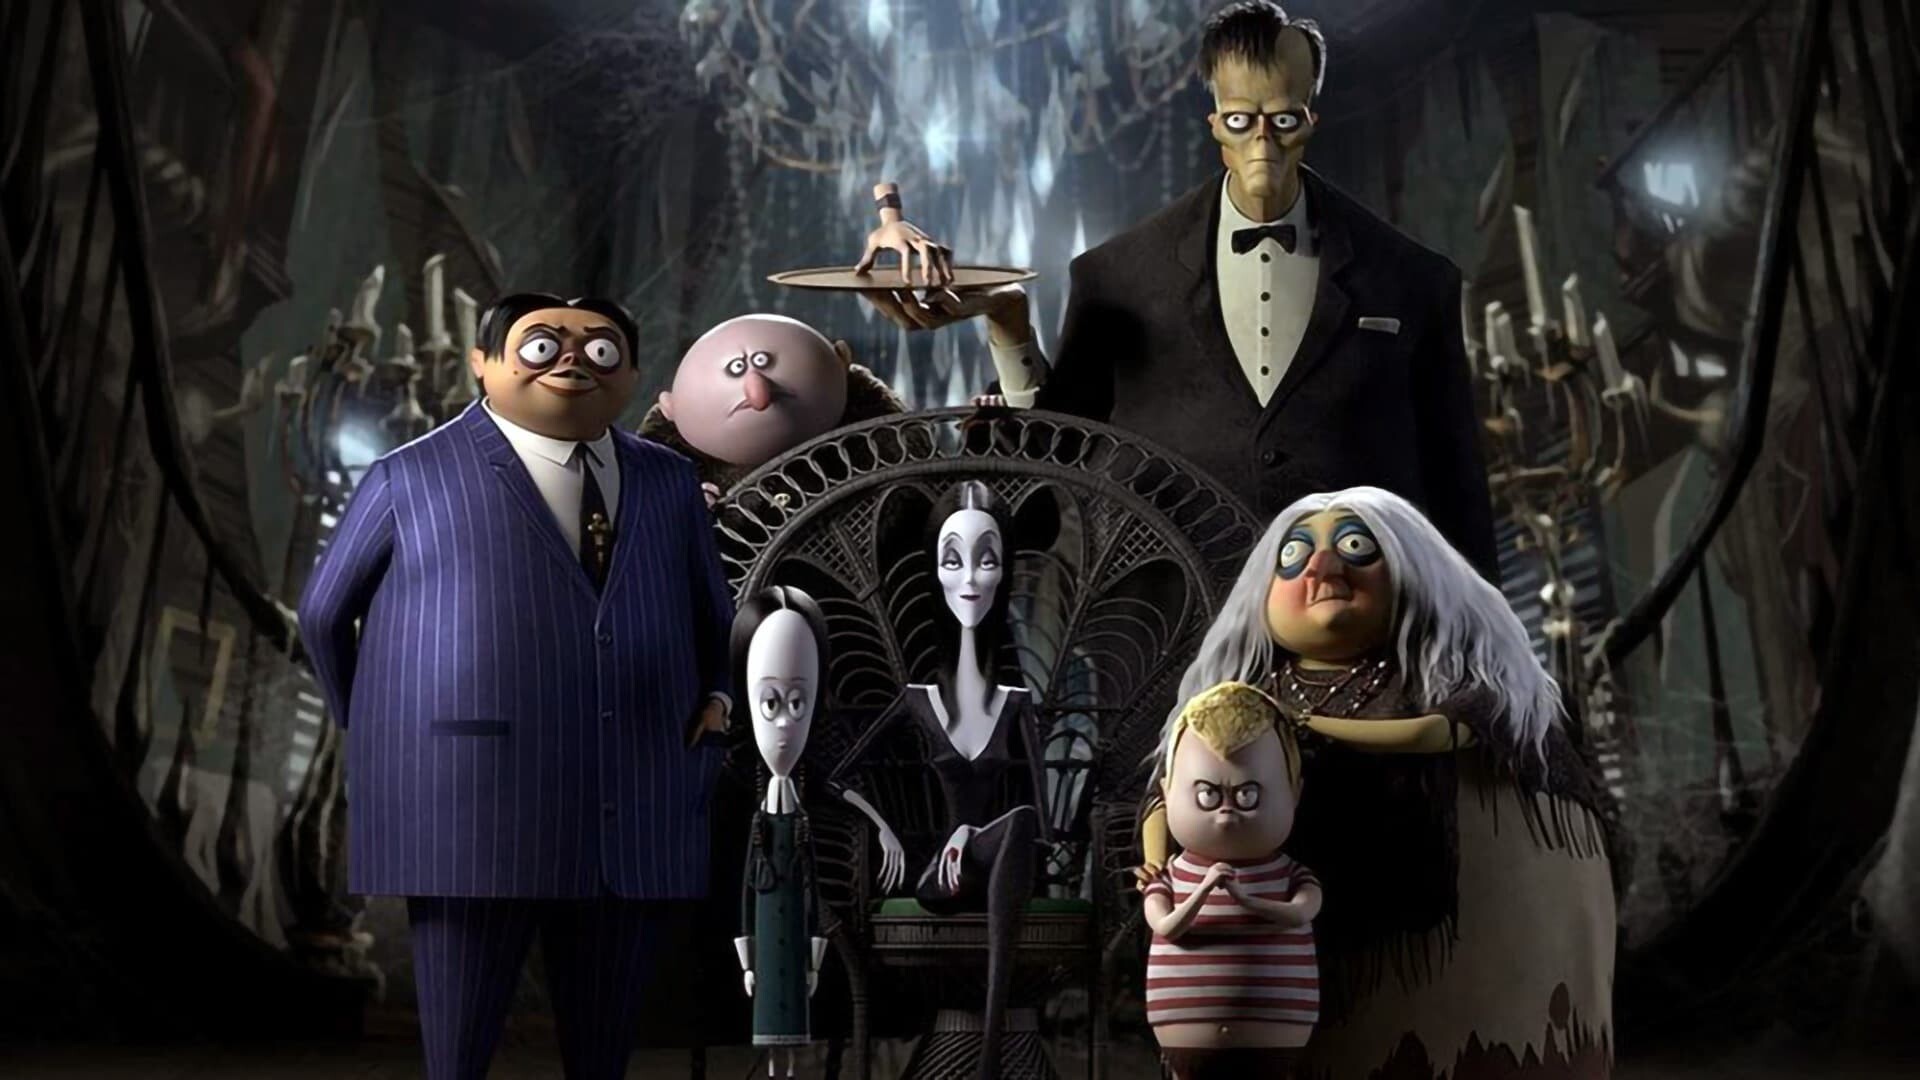 The Addams Family 2: Spooky family, A group of fictional characters created by American cartoonist Charles Addams. 1920x1080 Full HD Background.